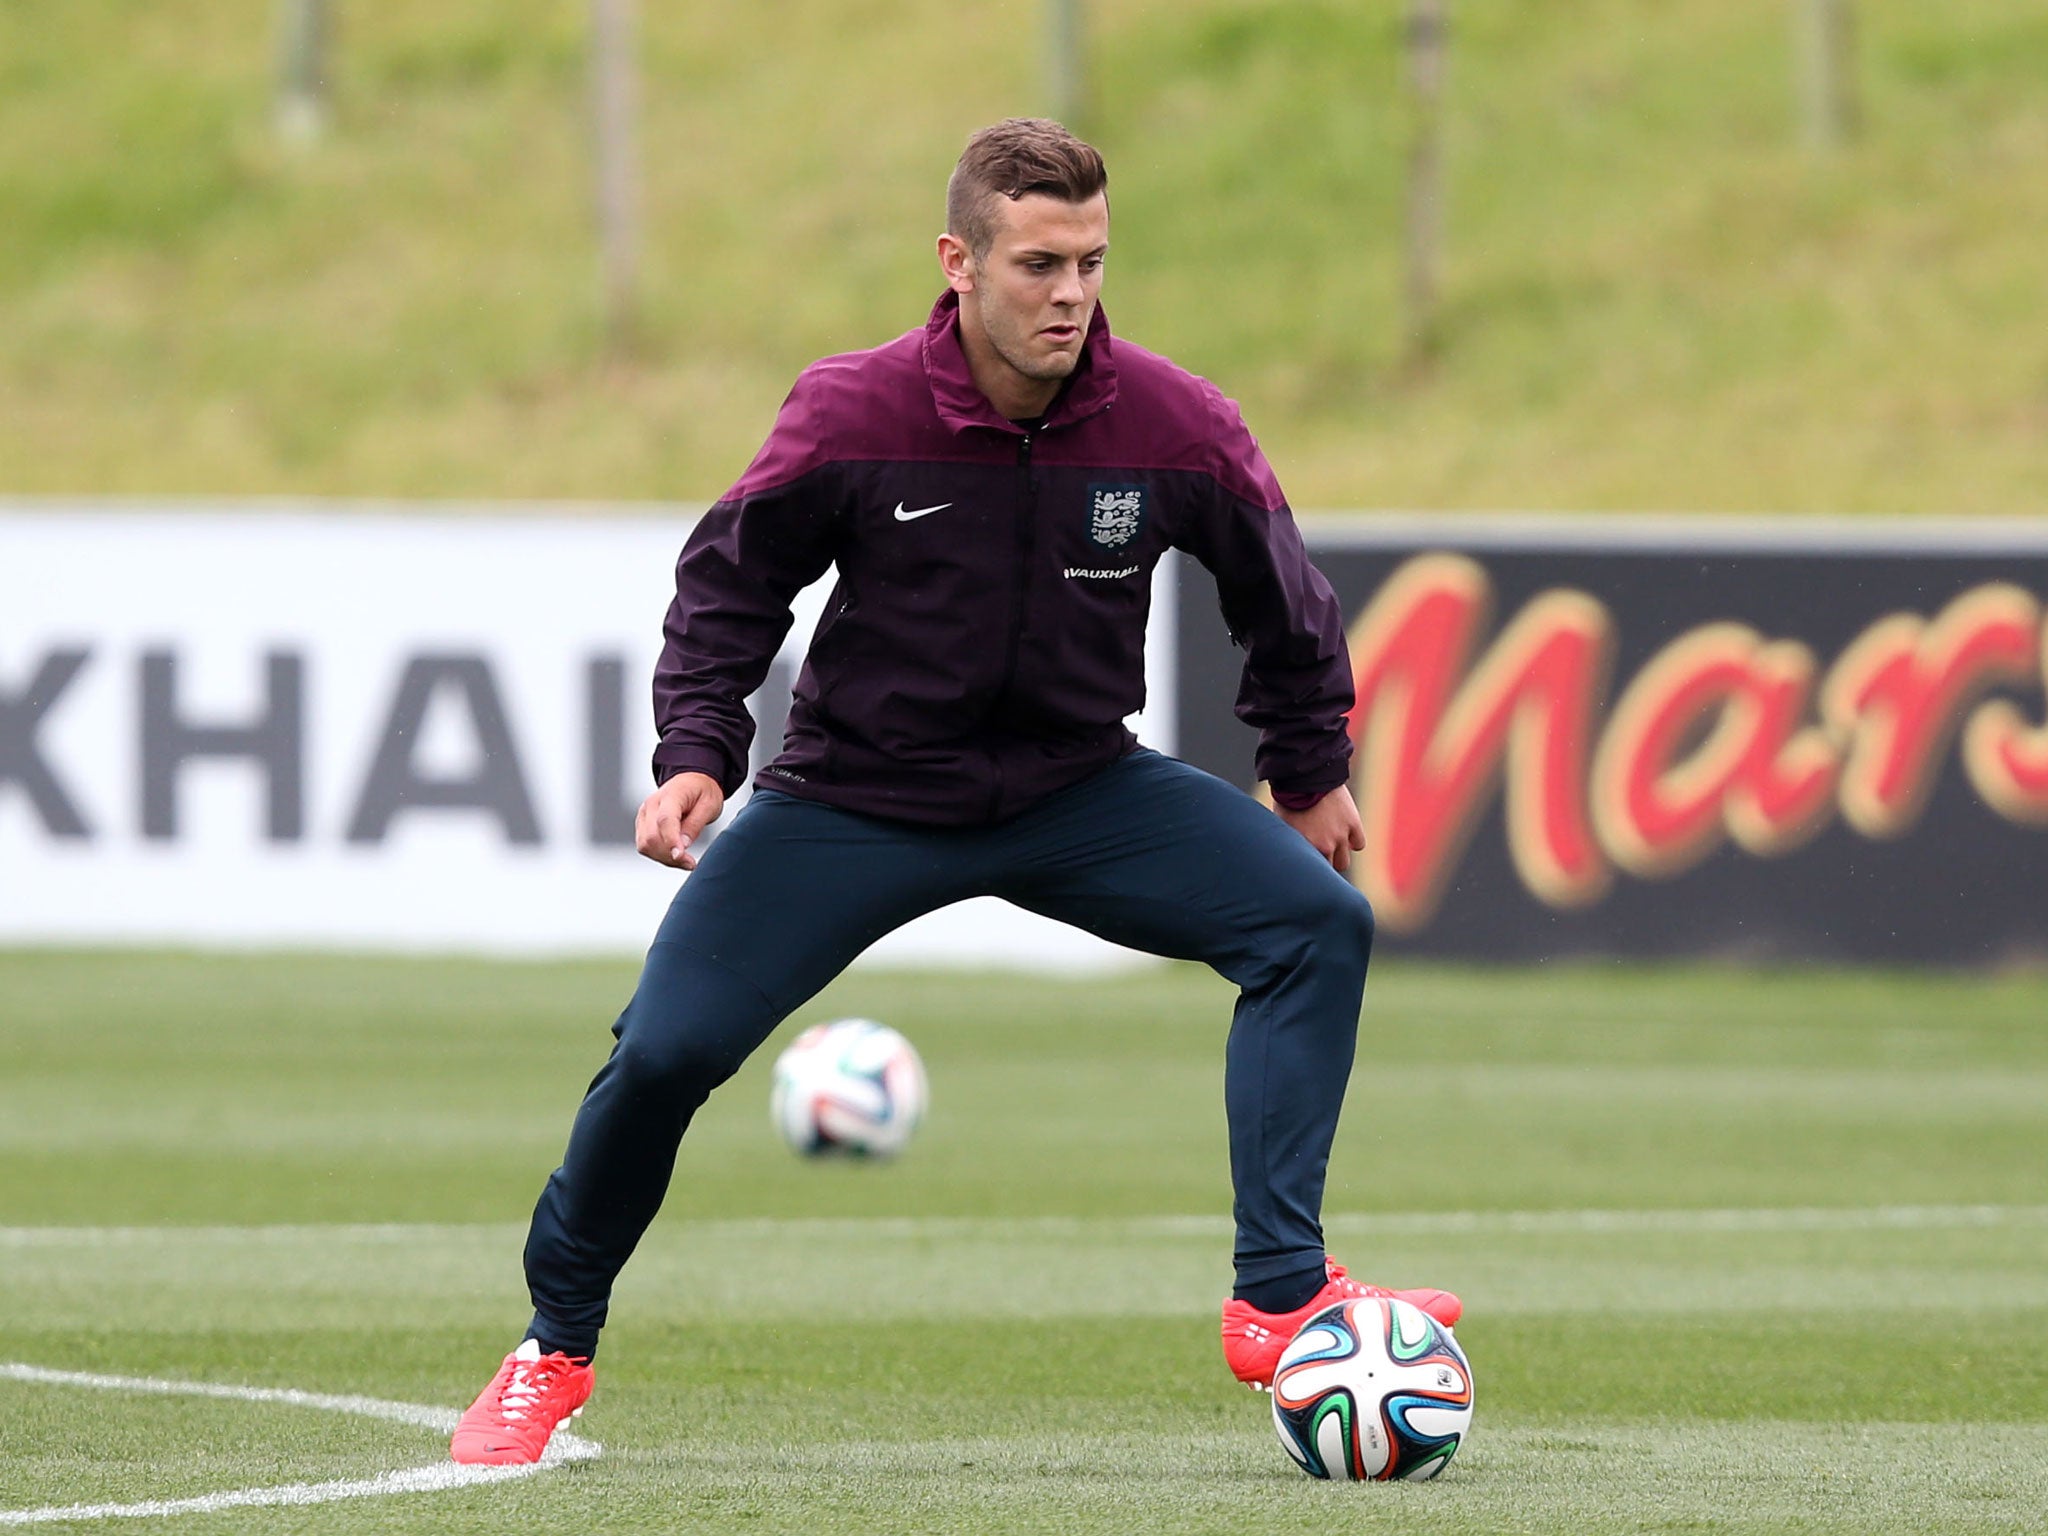 Jack Wilshere trains with England at St George's Park today